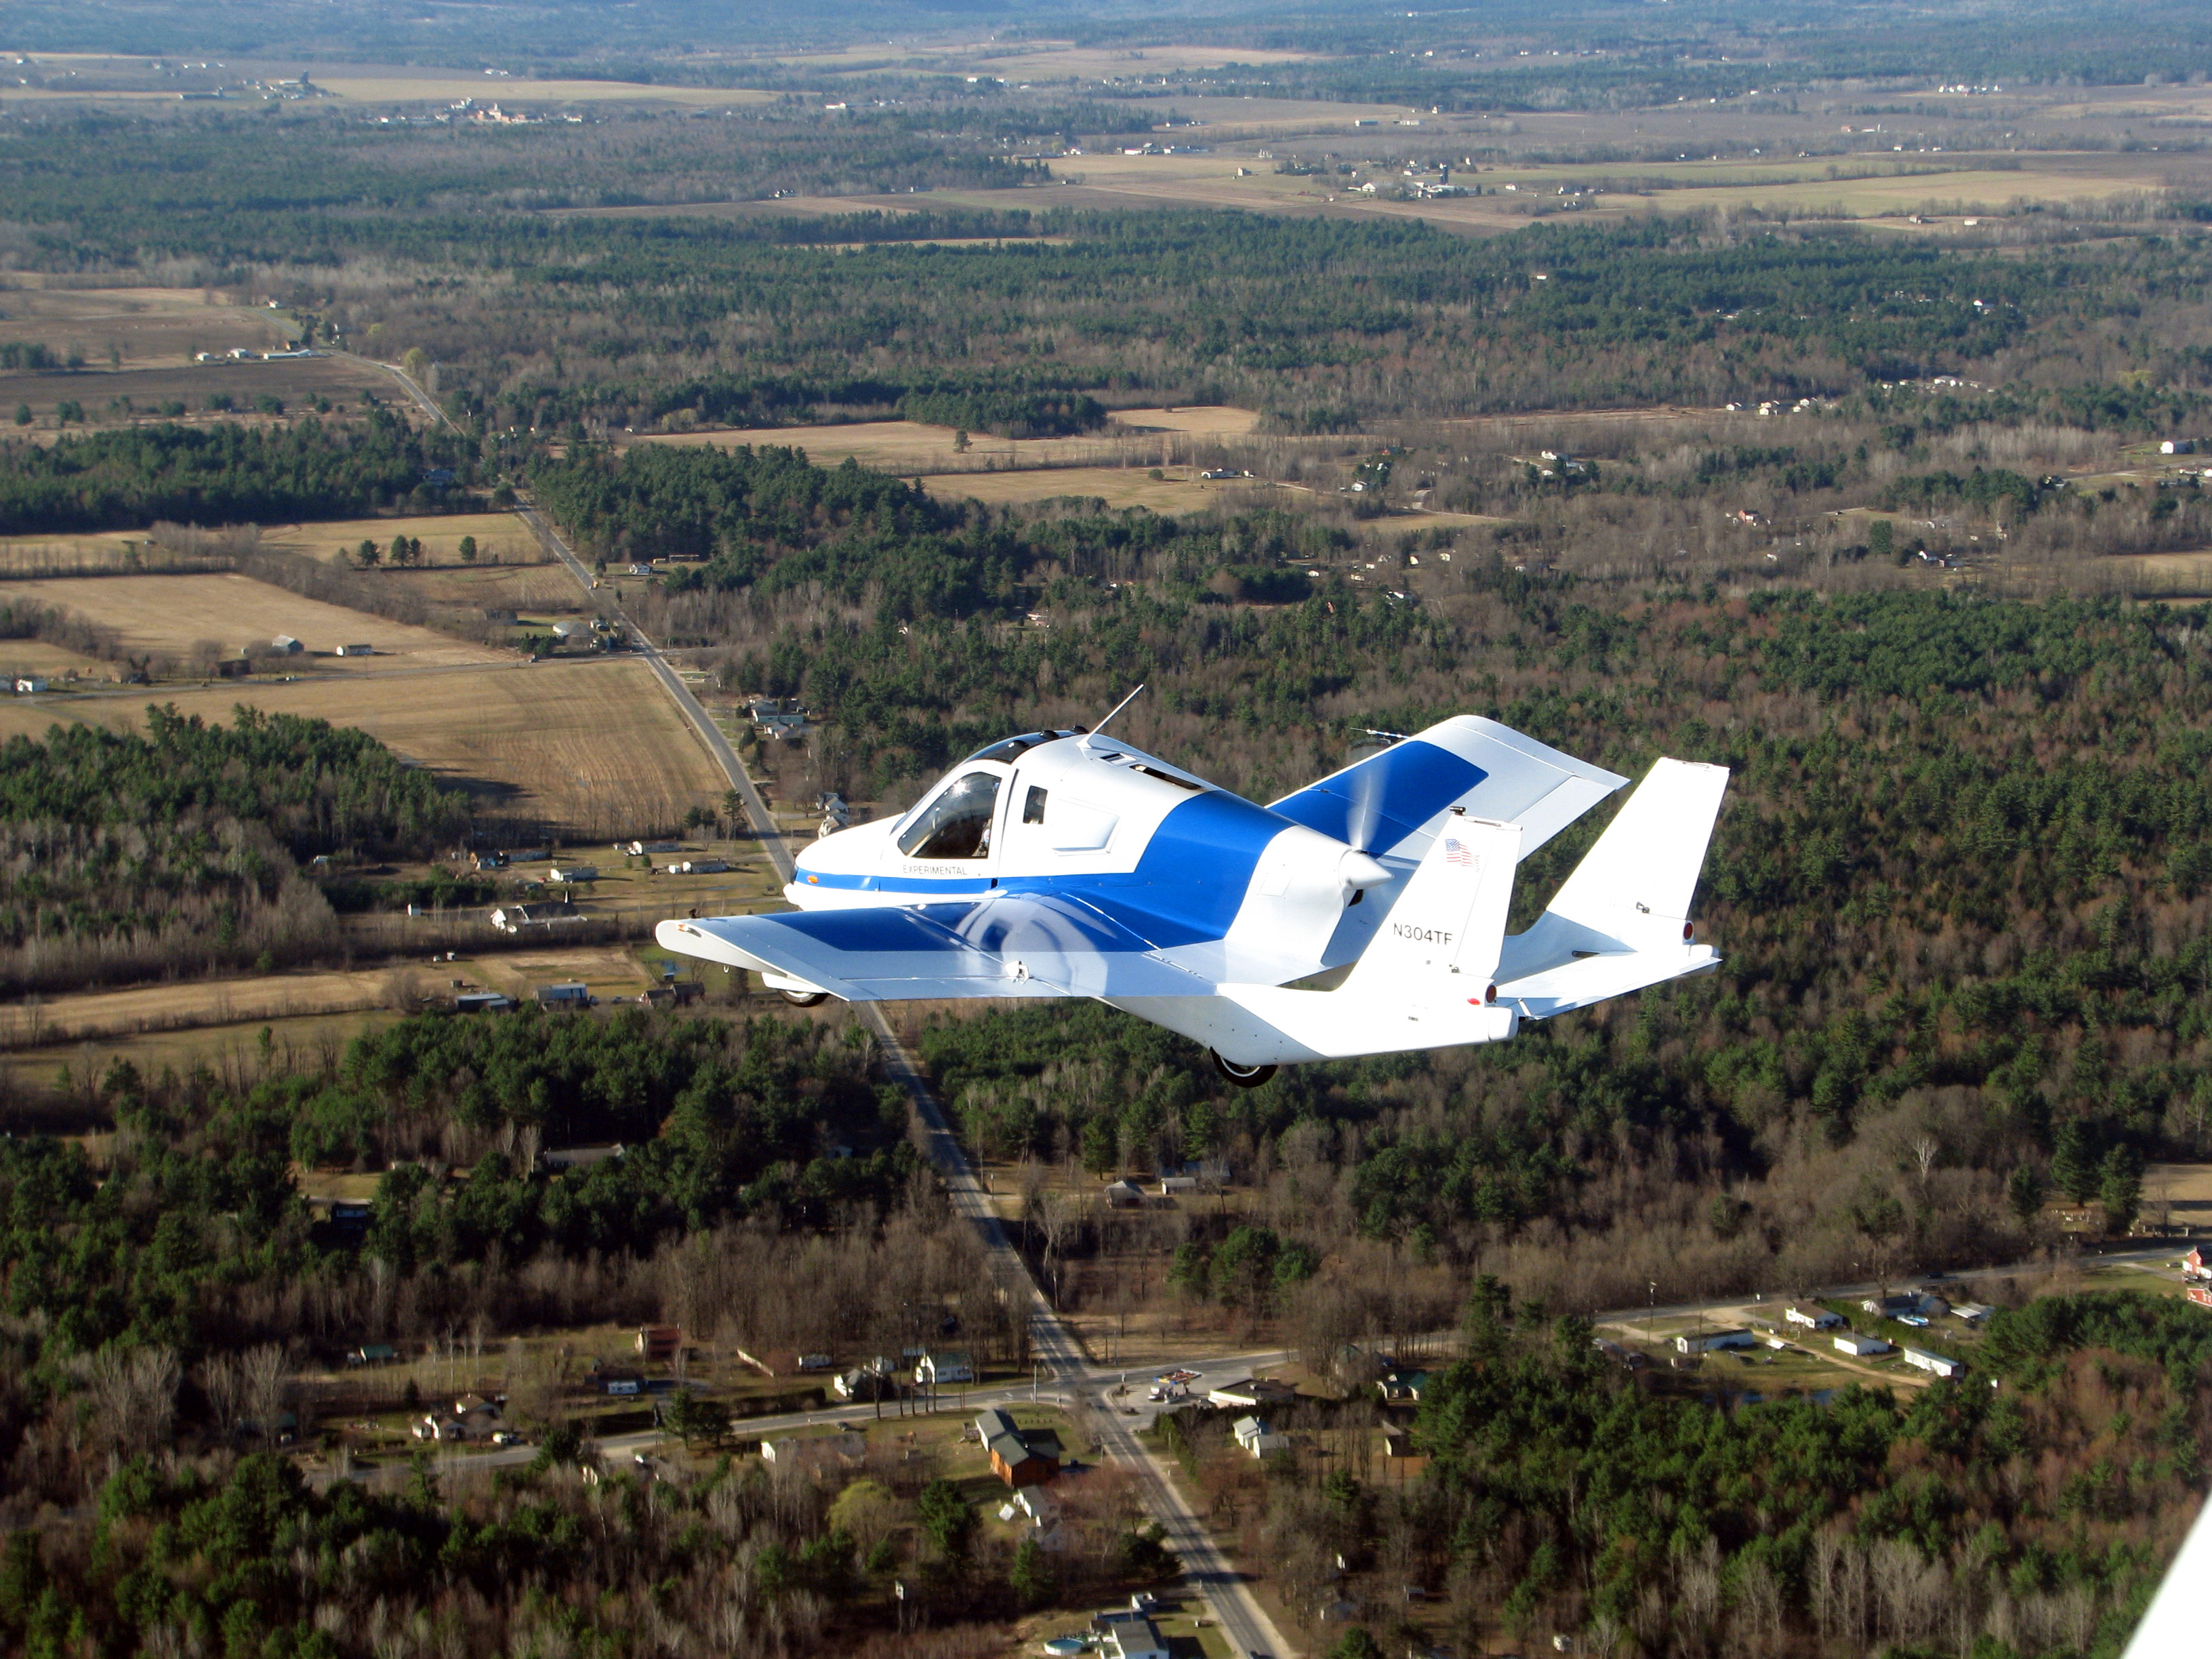 Terrafugia's prototype flying car, dubbed the Transition, during its first flight, May 23, 2012. (Terrafugia/AP)